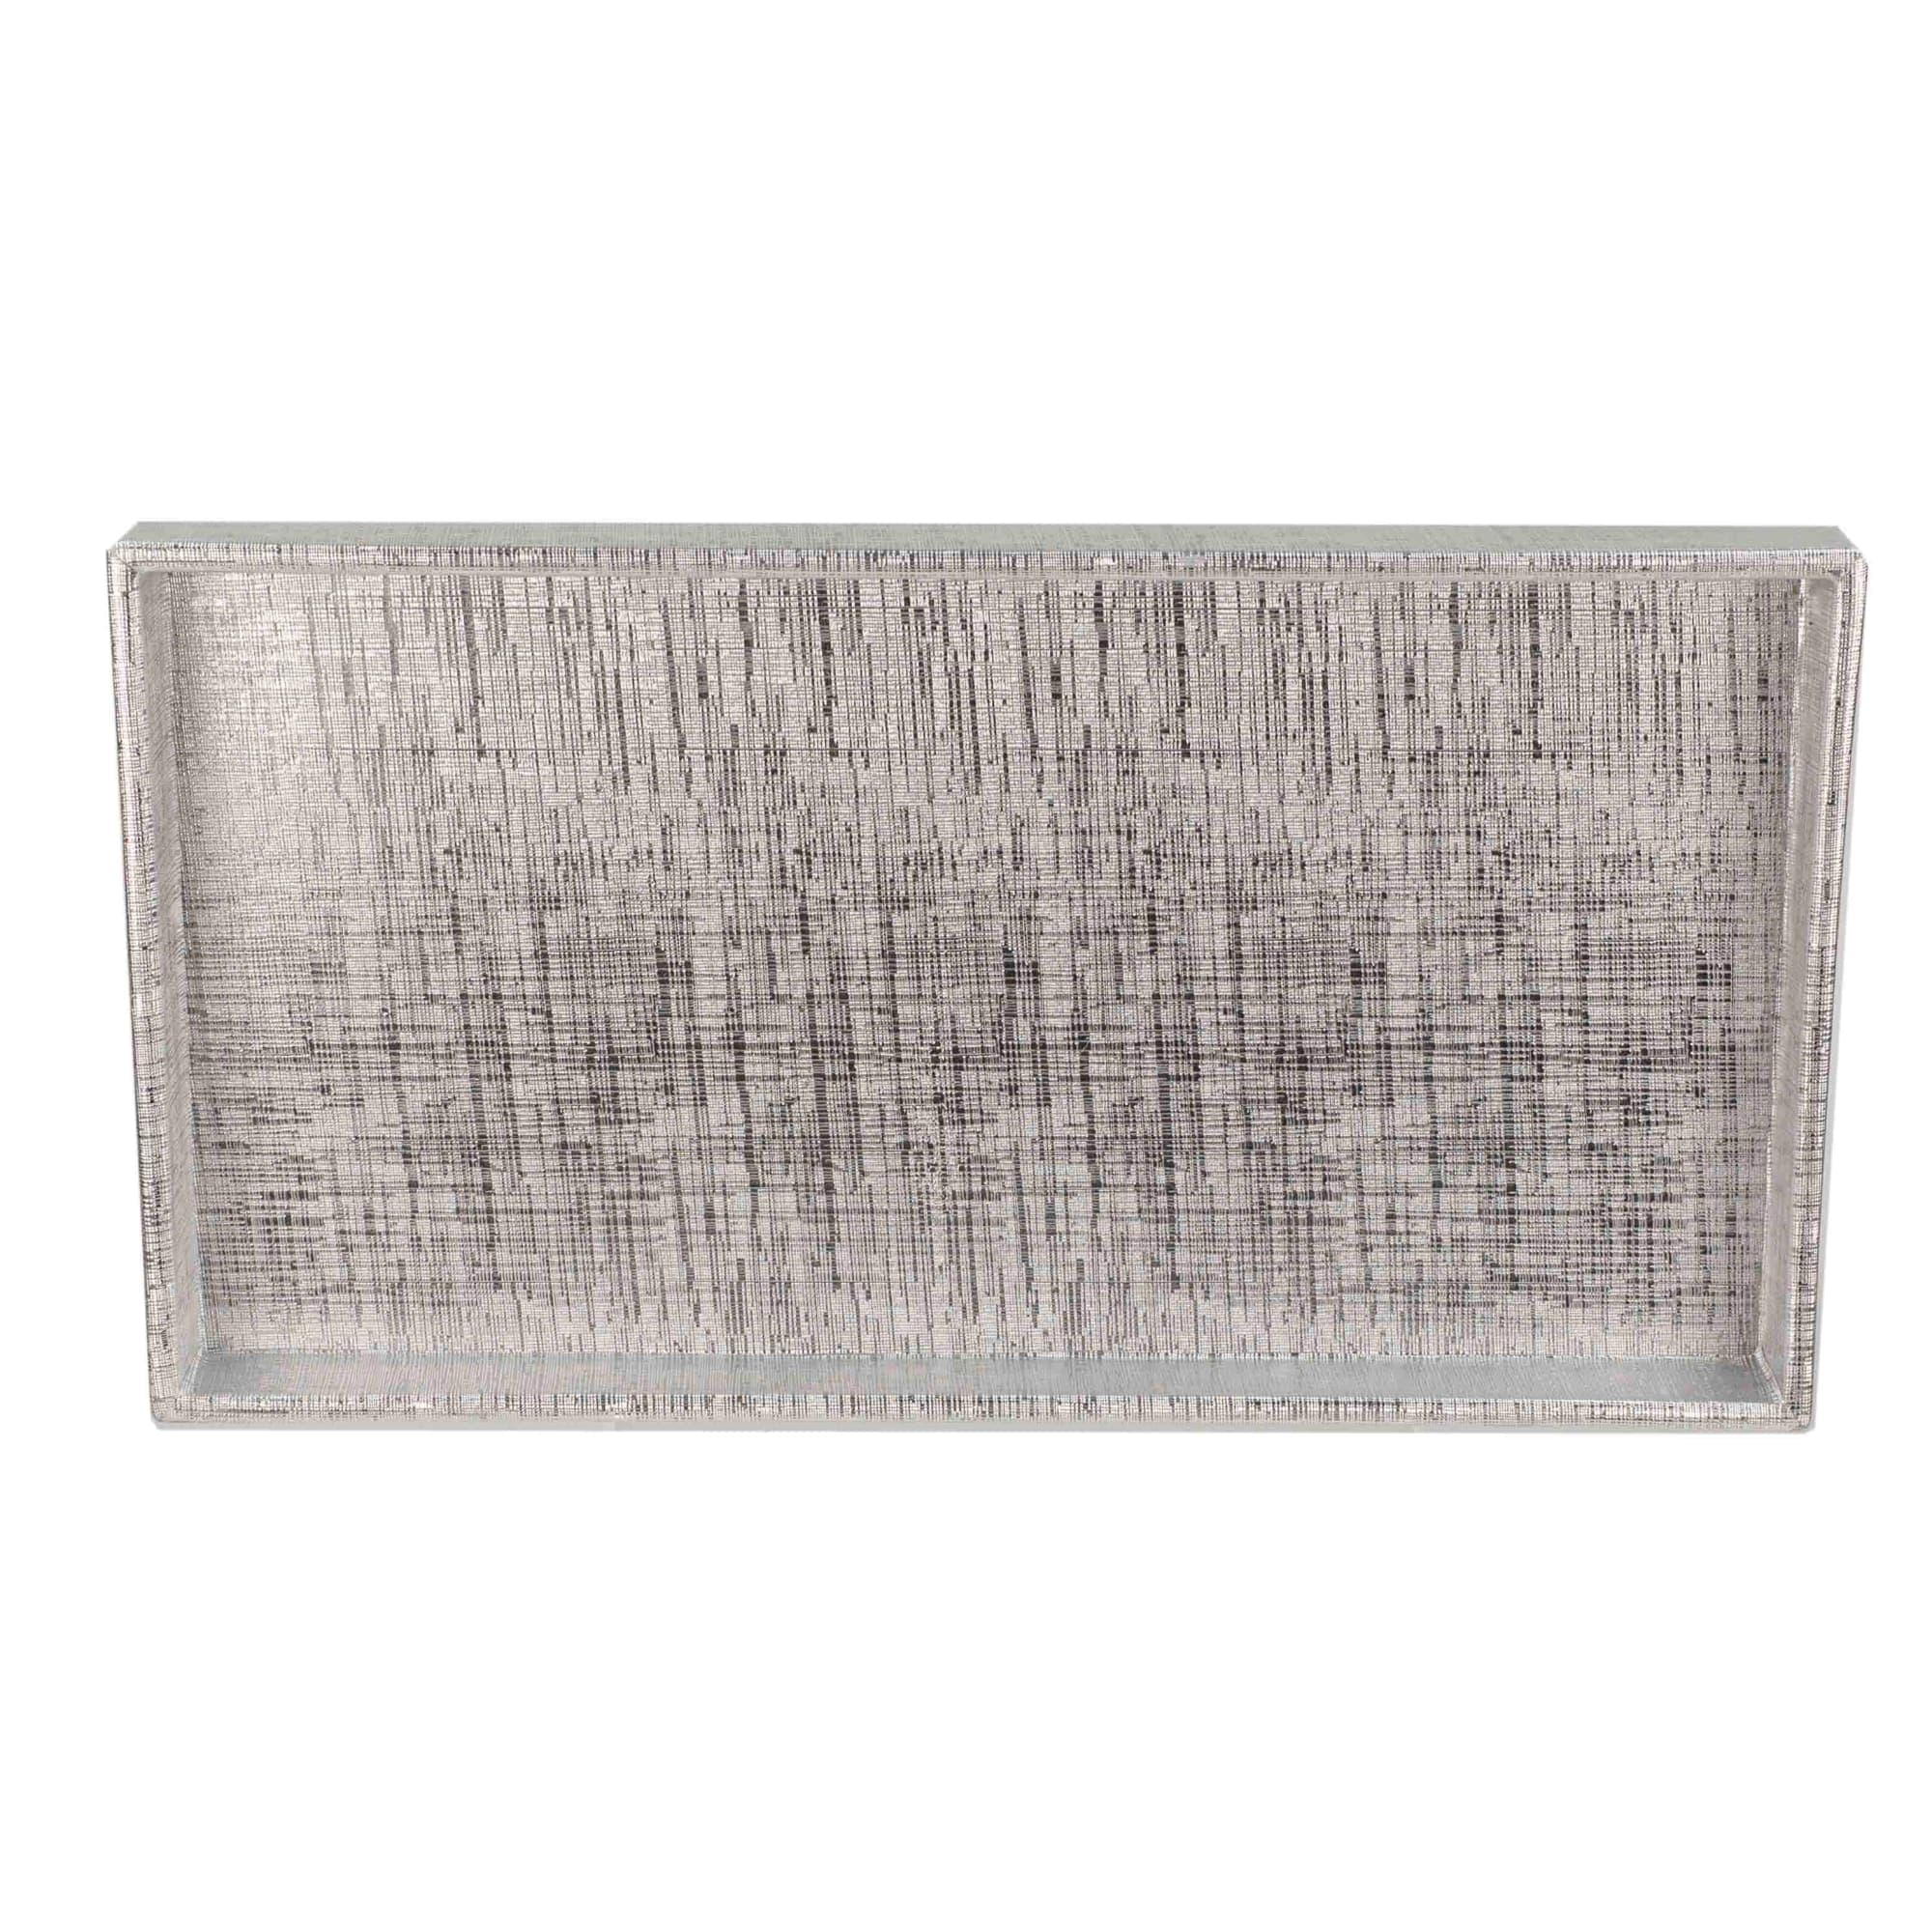 Home Basics Metallic Weave Vanity Tray, Silver $5.00 EACH, CASE PACK OF 8